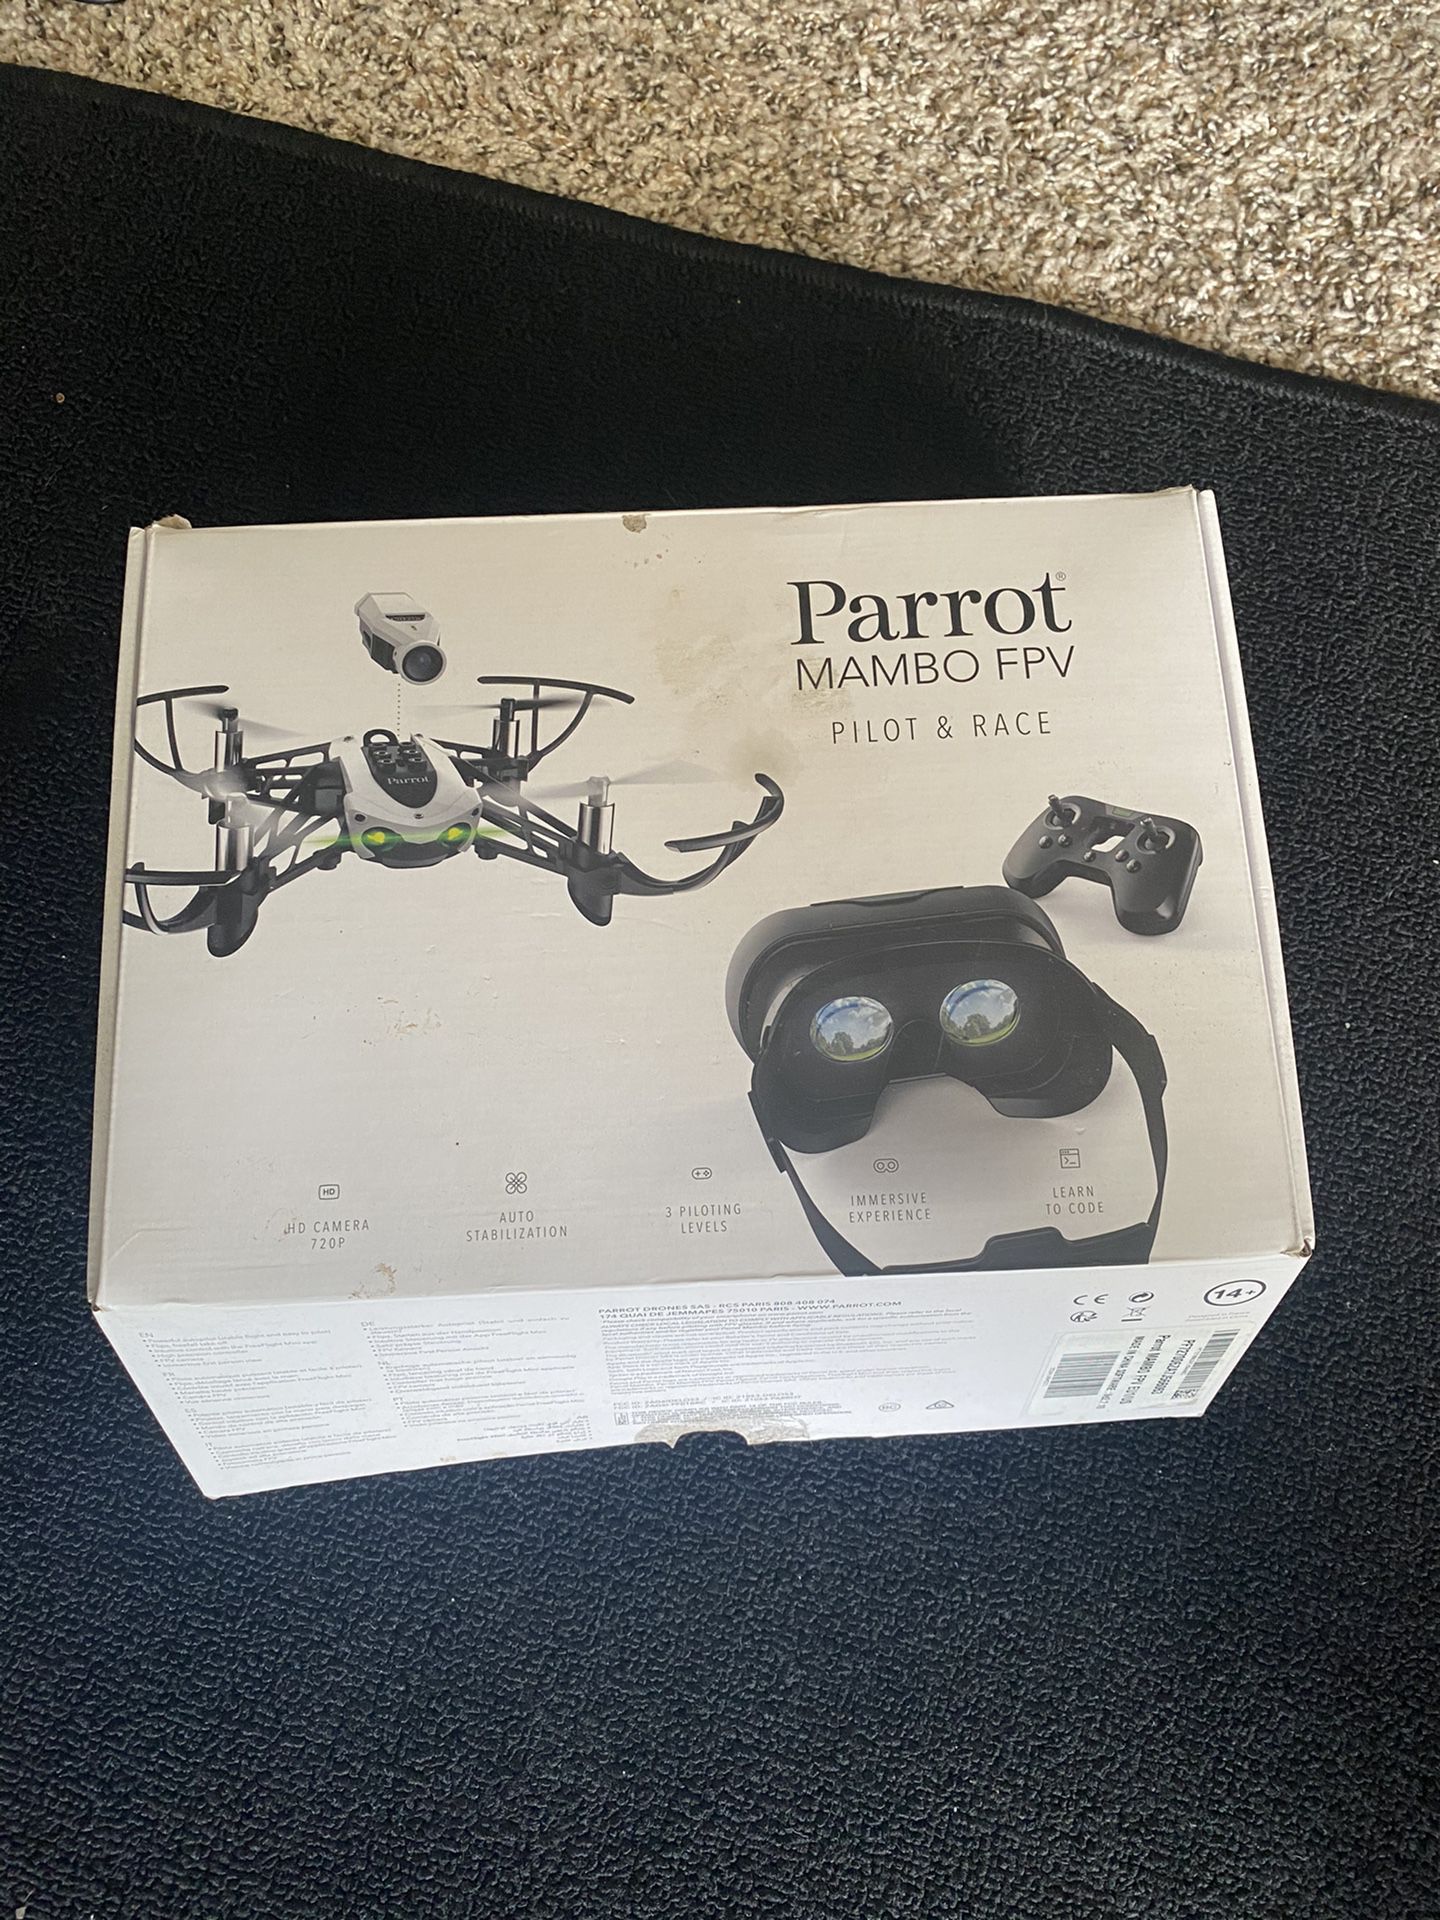 Parrot MAMBO FPV Drone